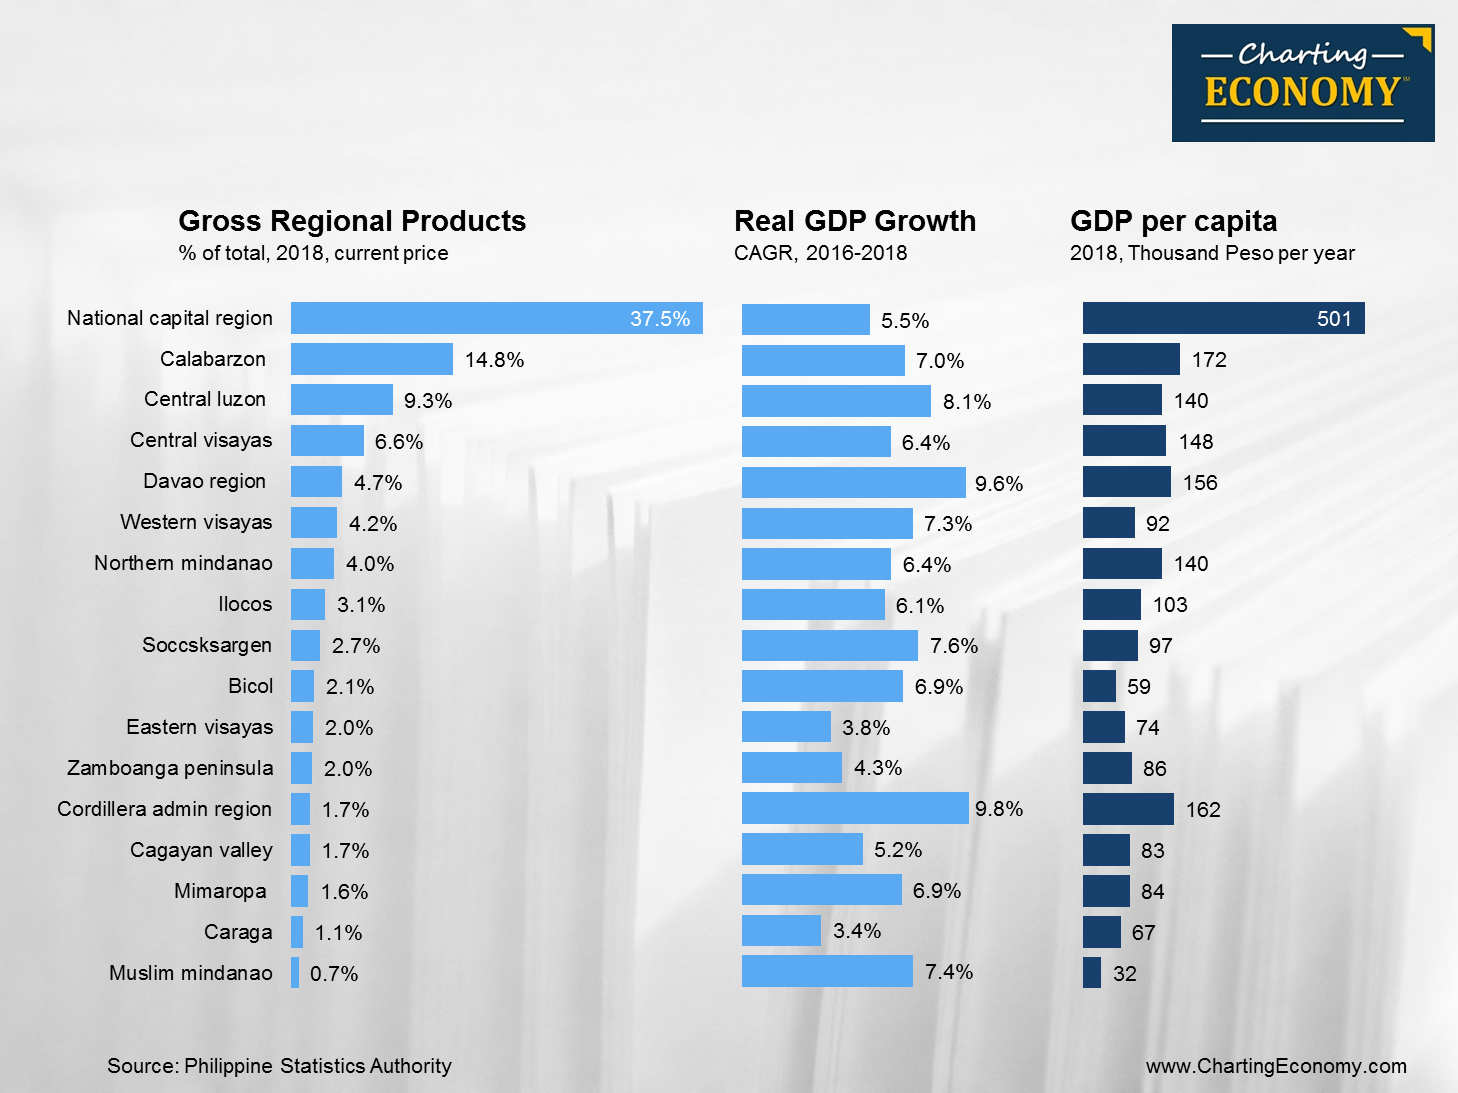 How Has The Structure Of The Philippines Gdp Changed Over The Years